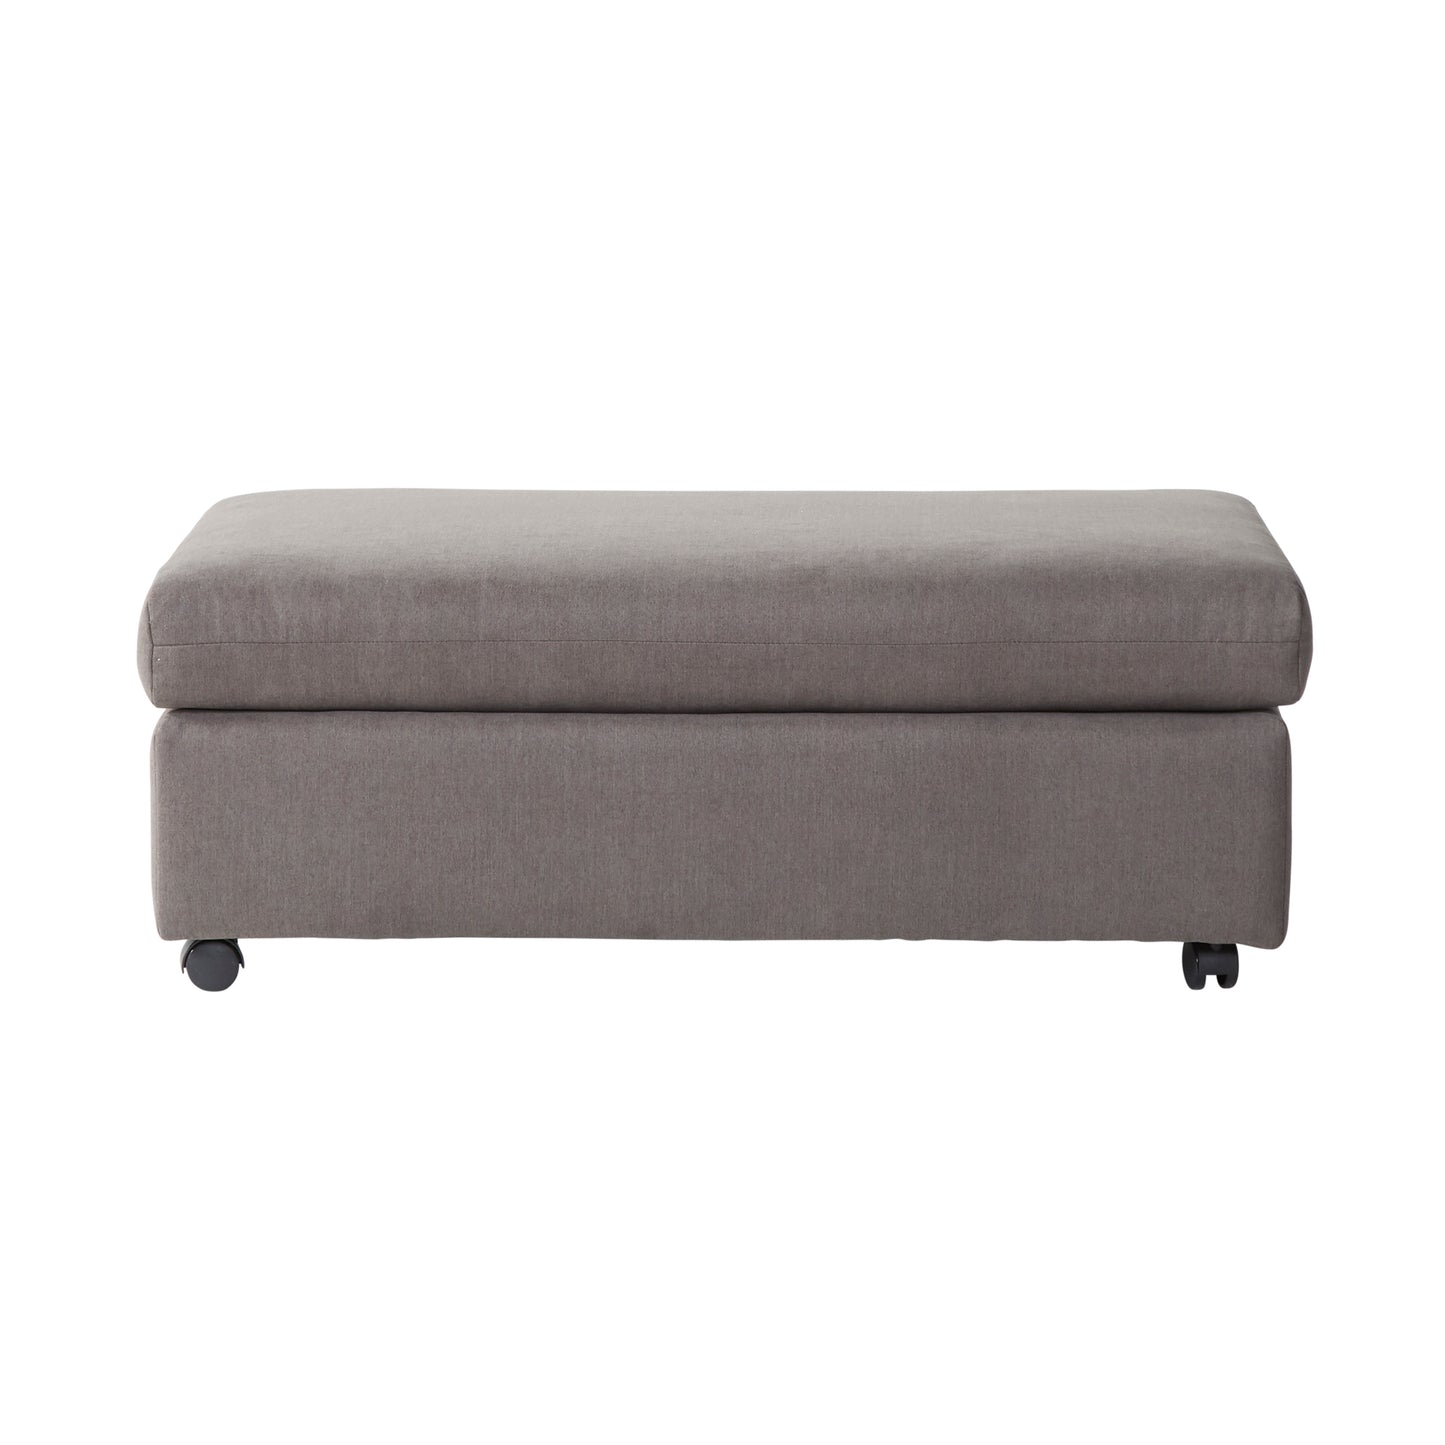 Roundhill Furniture Enda Pillow Back Fabric Sofa and Cuddler Chair Living Room Collection, Carbon Gray